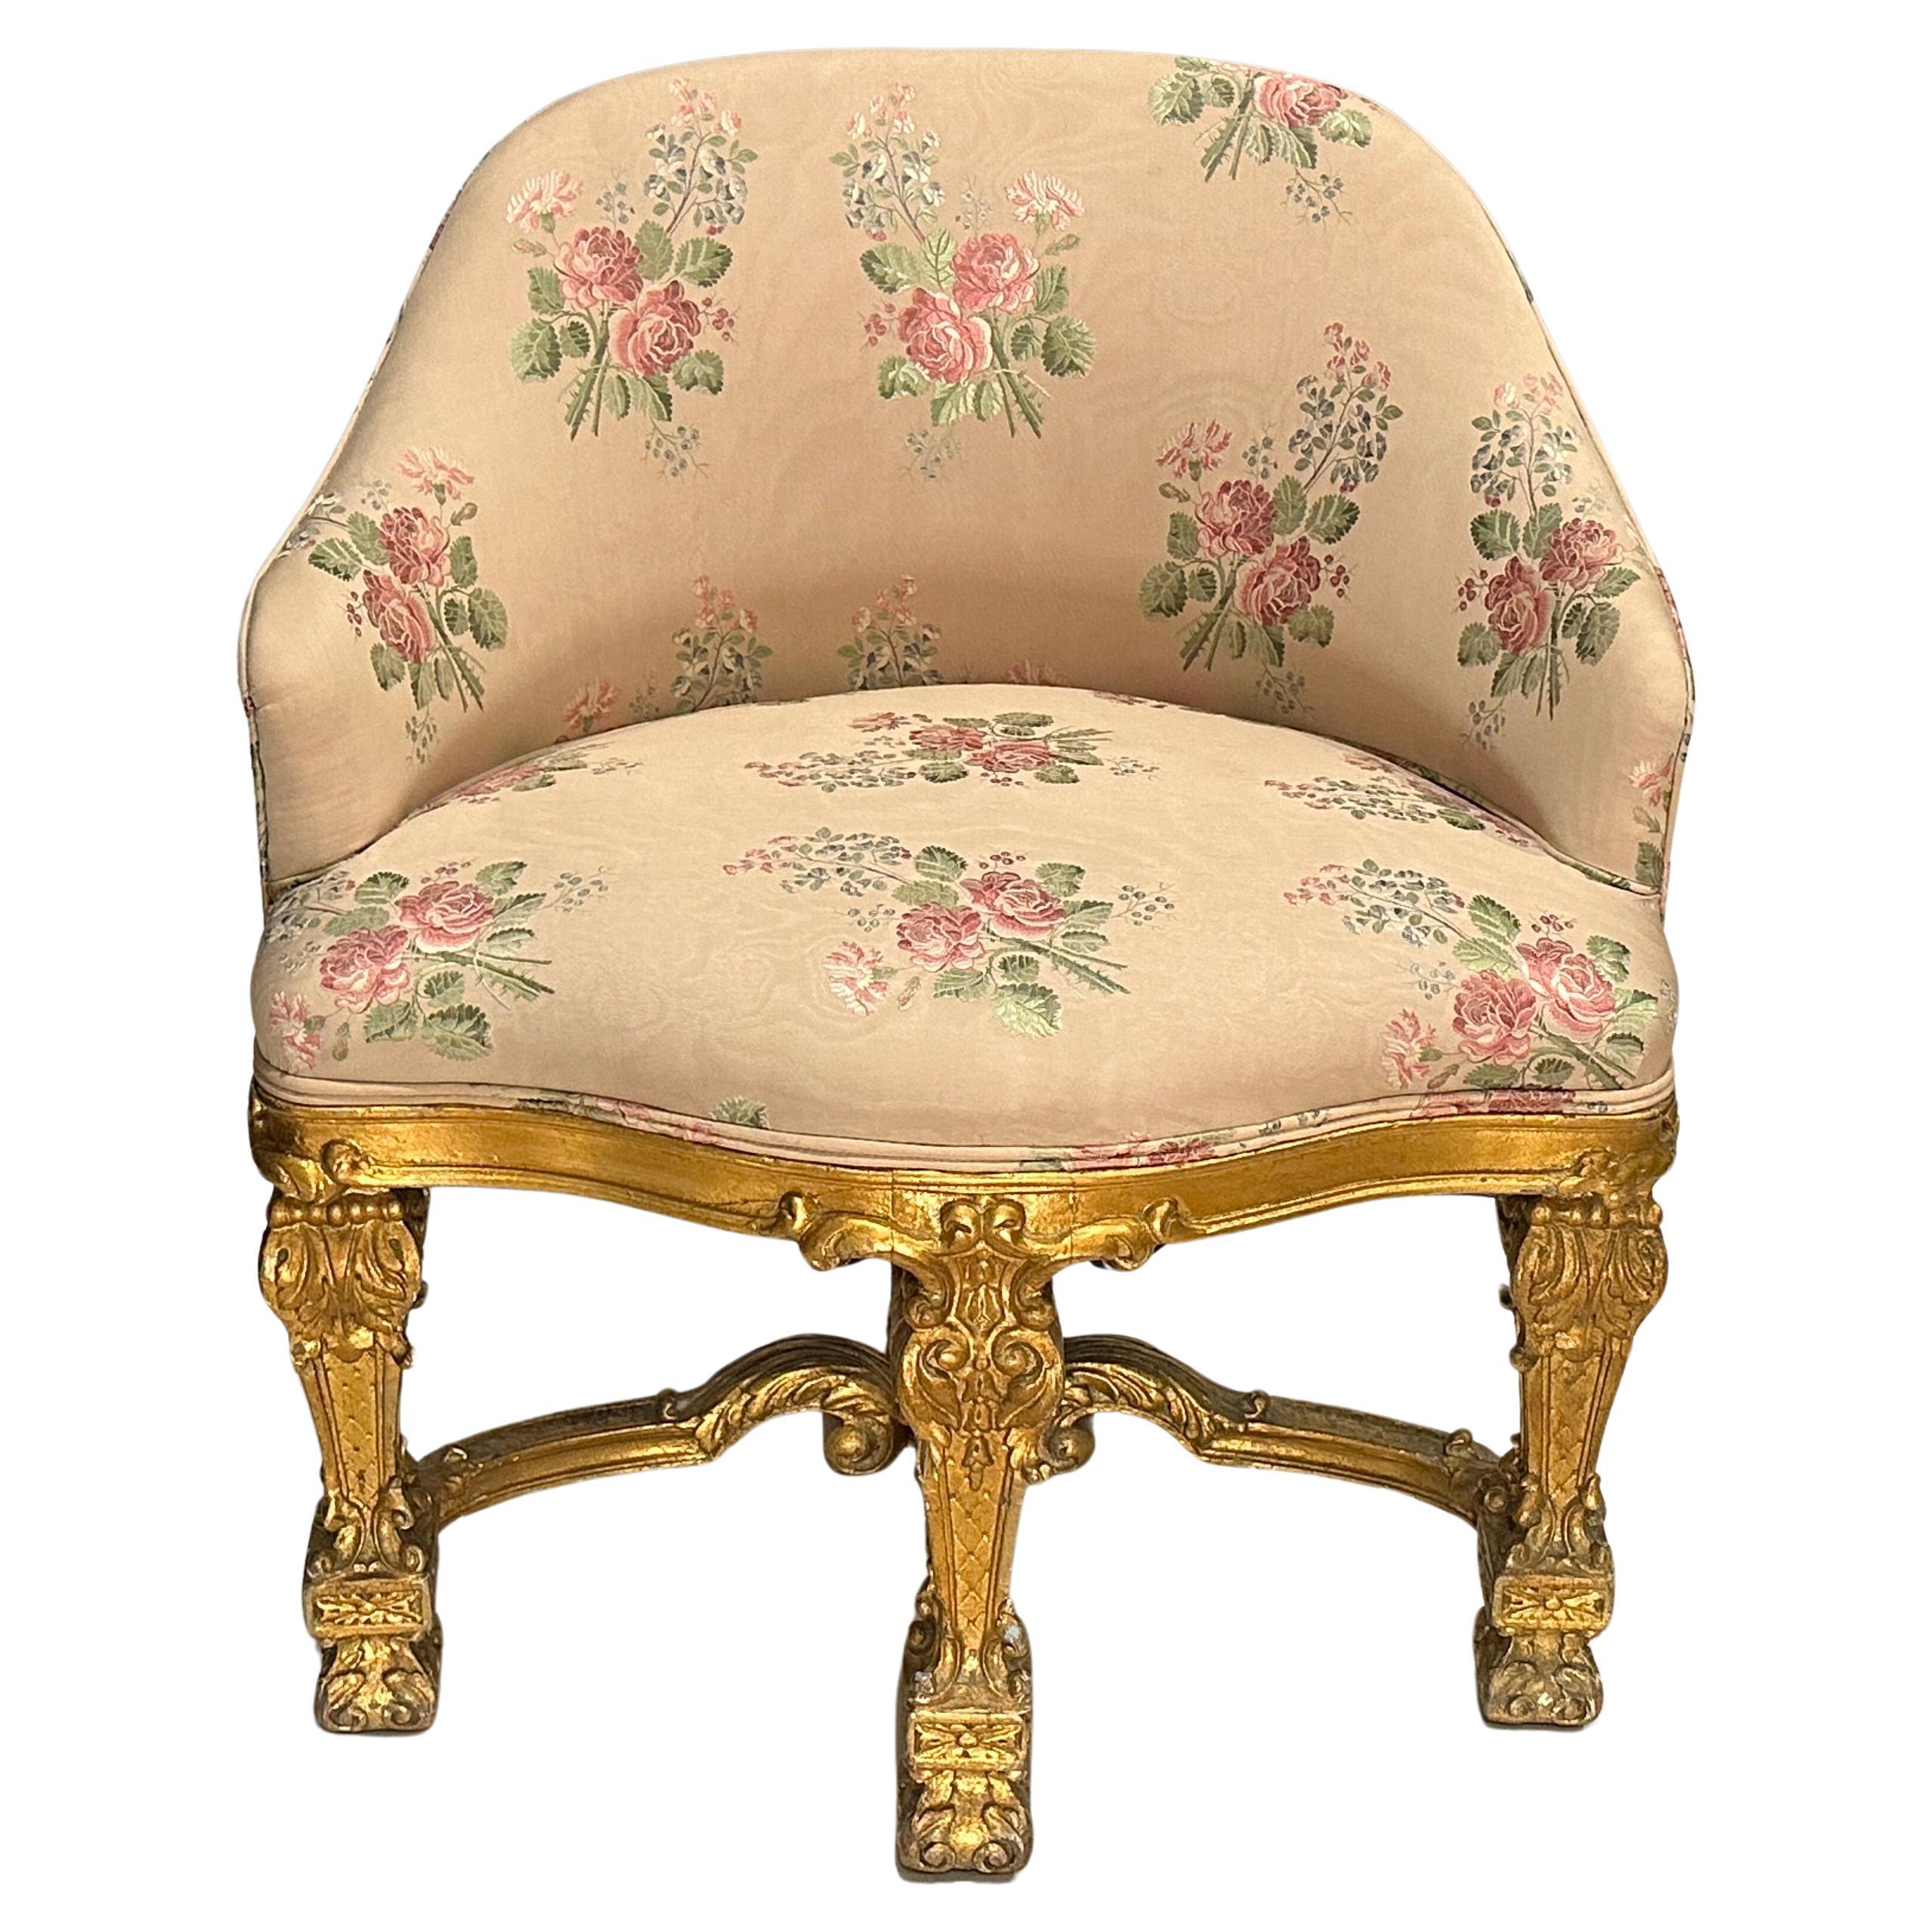 19th Century Carved And Gilt Vanity Chair For Sale